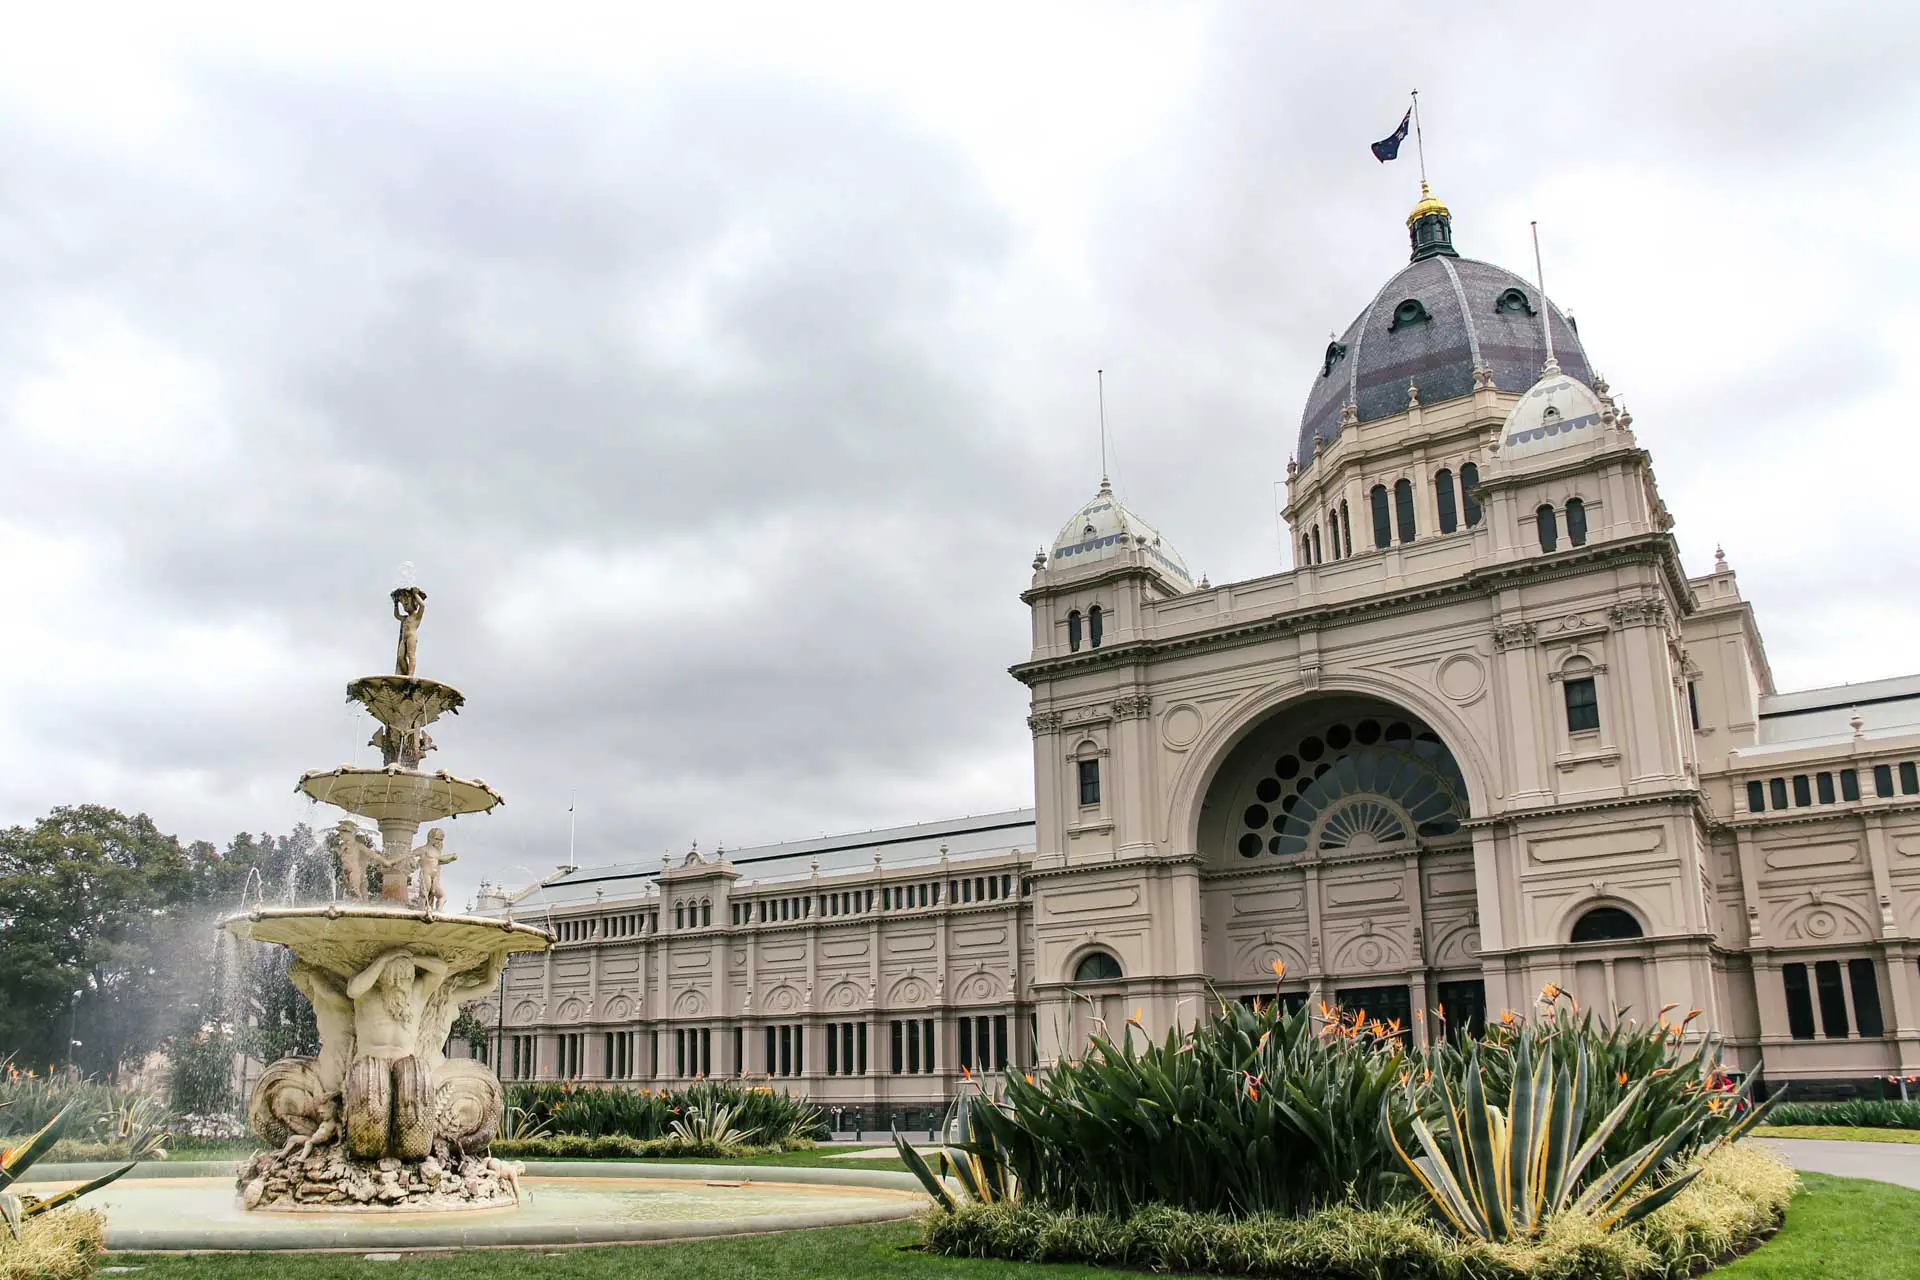 Front facade of historic exhibition building with fountain in foreground